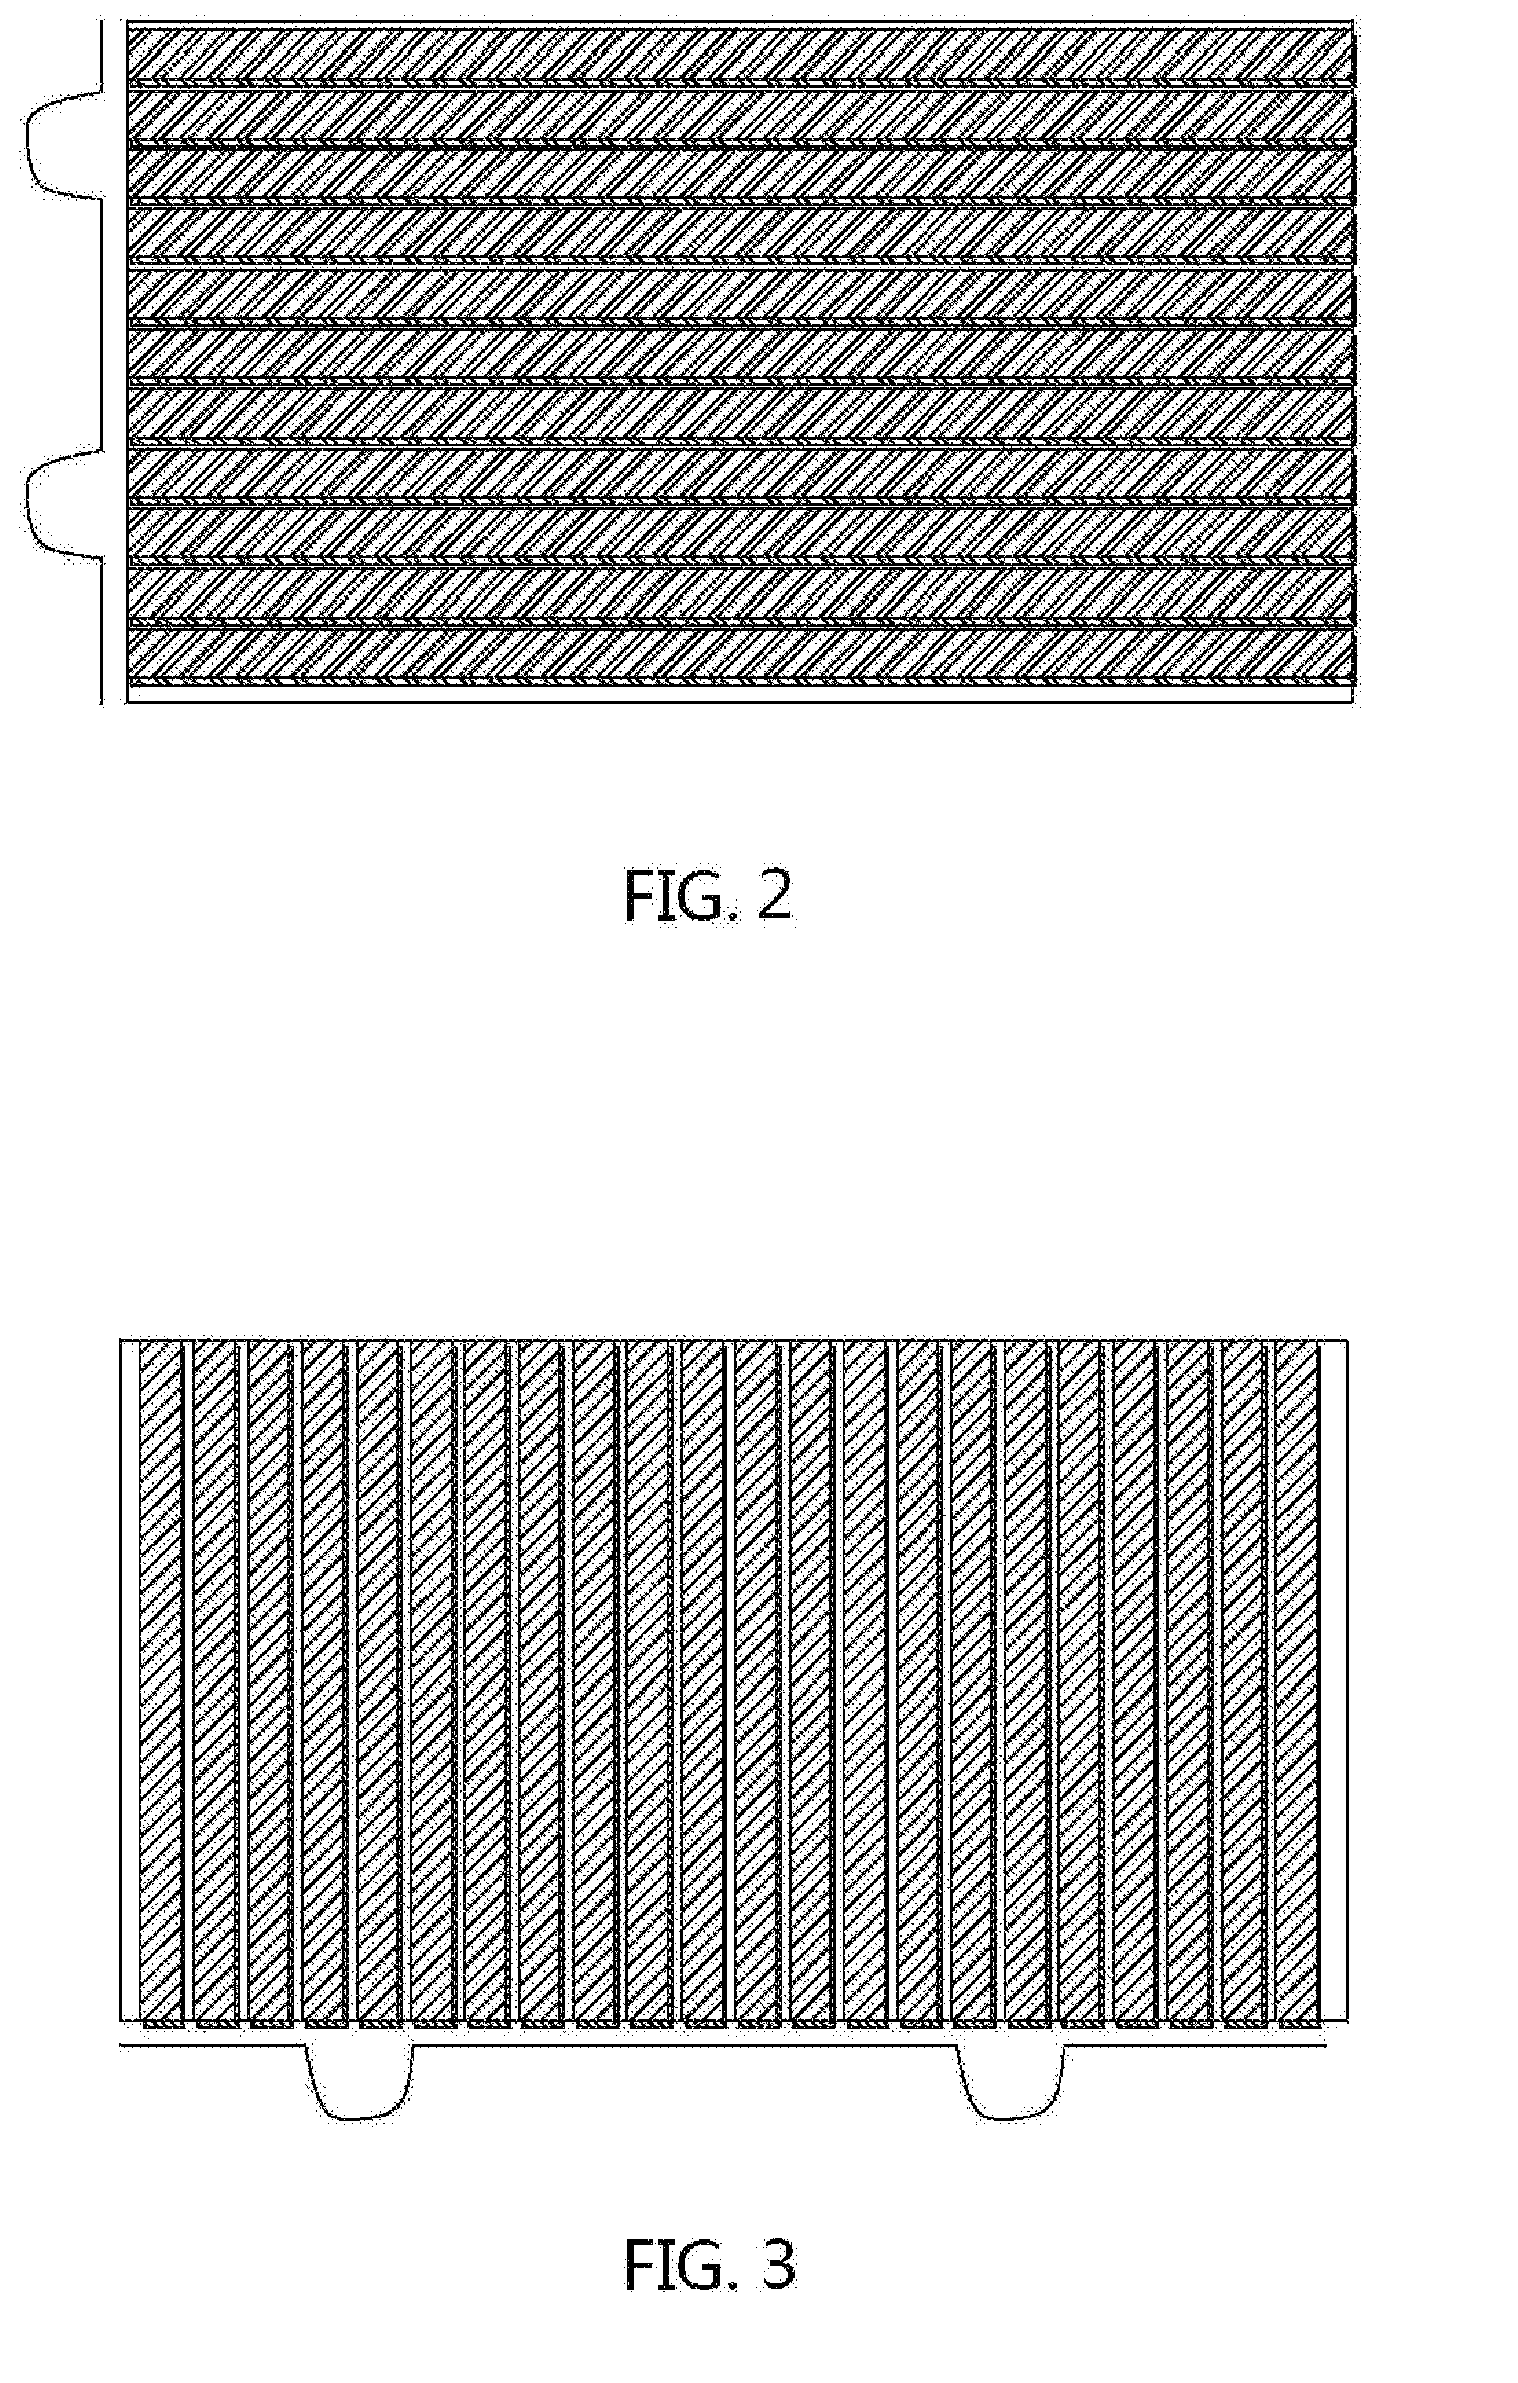 Method for Scanning Projective Capacitive Touch Panel, Storage Medium and Apparatus for Scanning Projective Capacitive Touch Panel